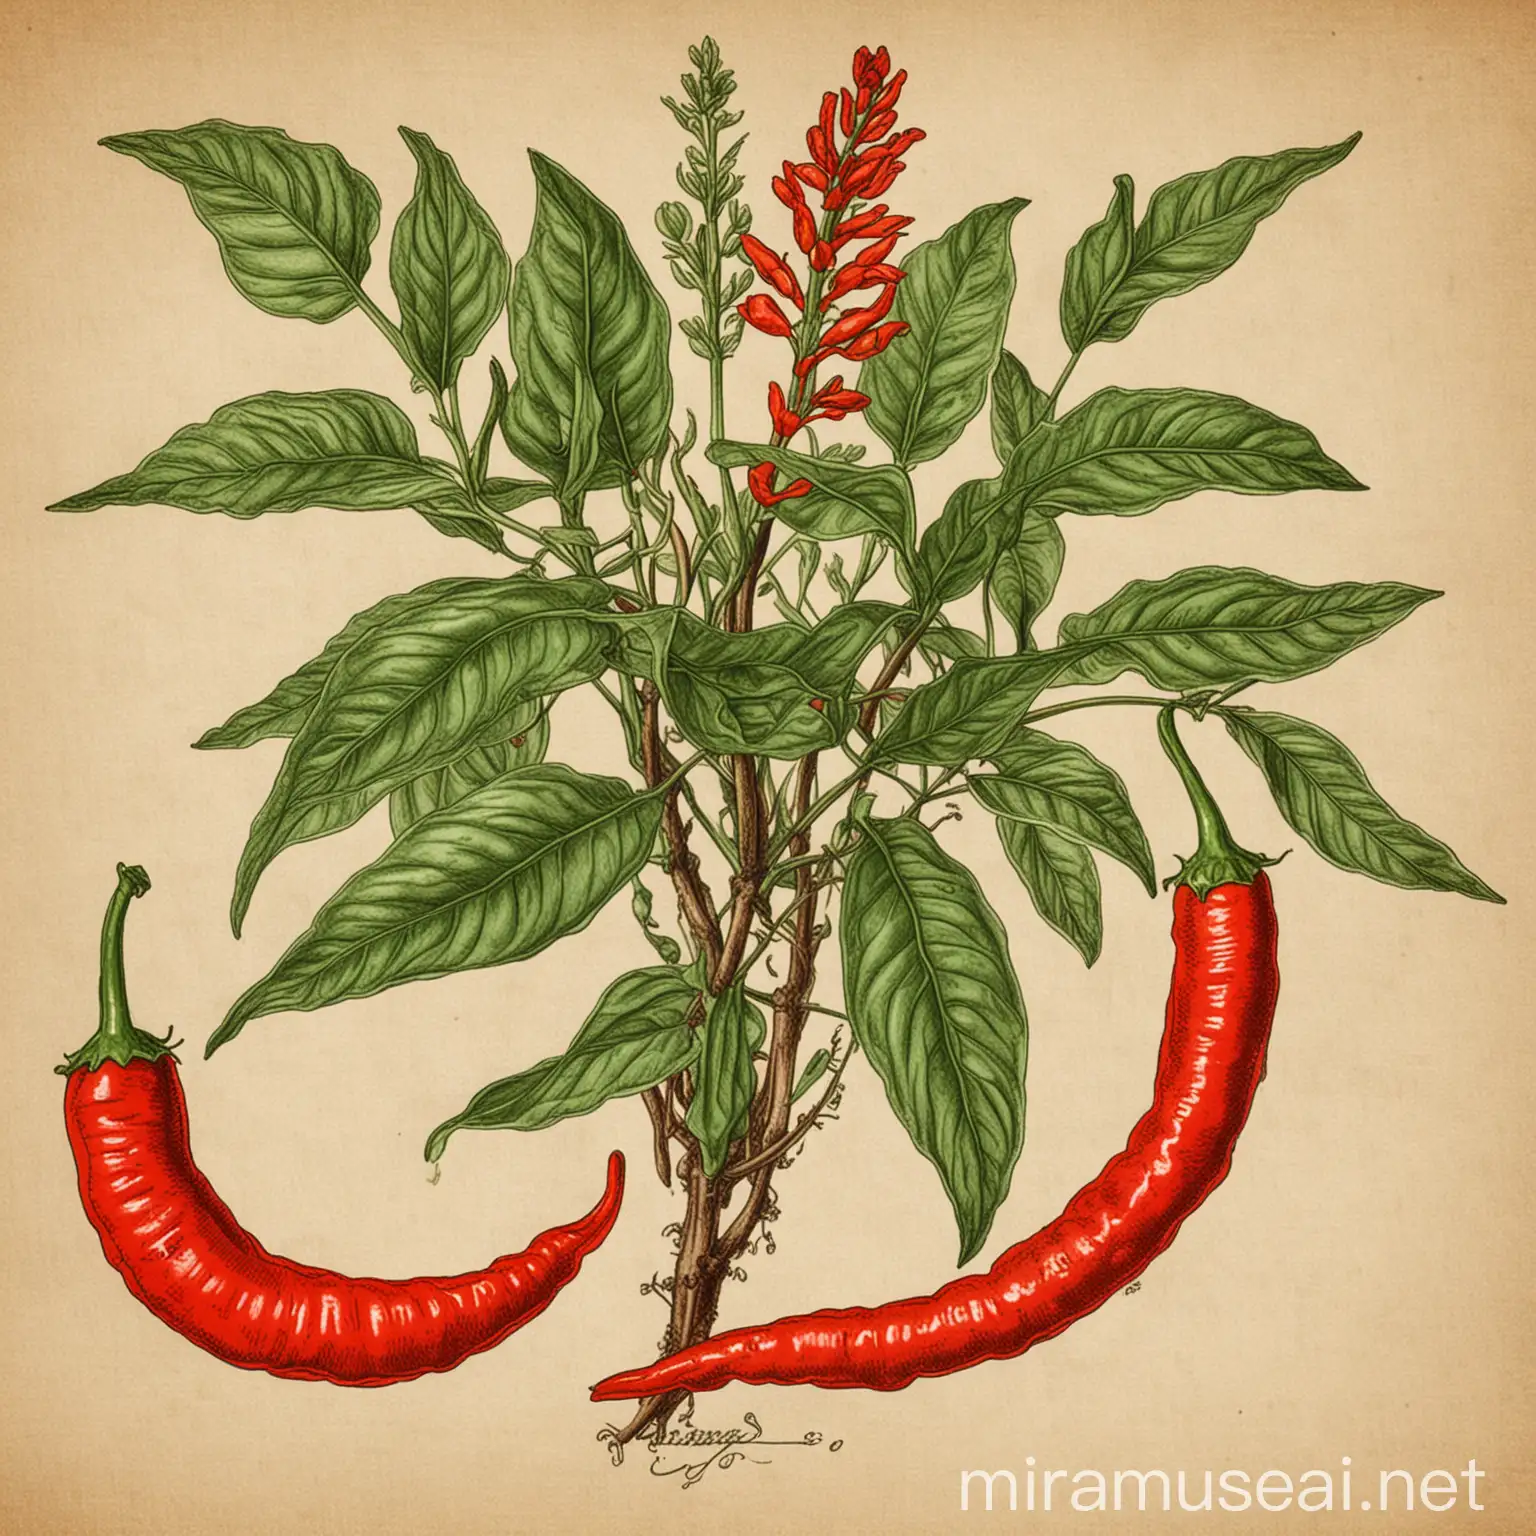 cayenne peppers and cayenne plant in the style of a 1700's scientific drawing. use color.